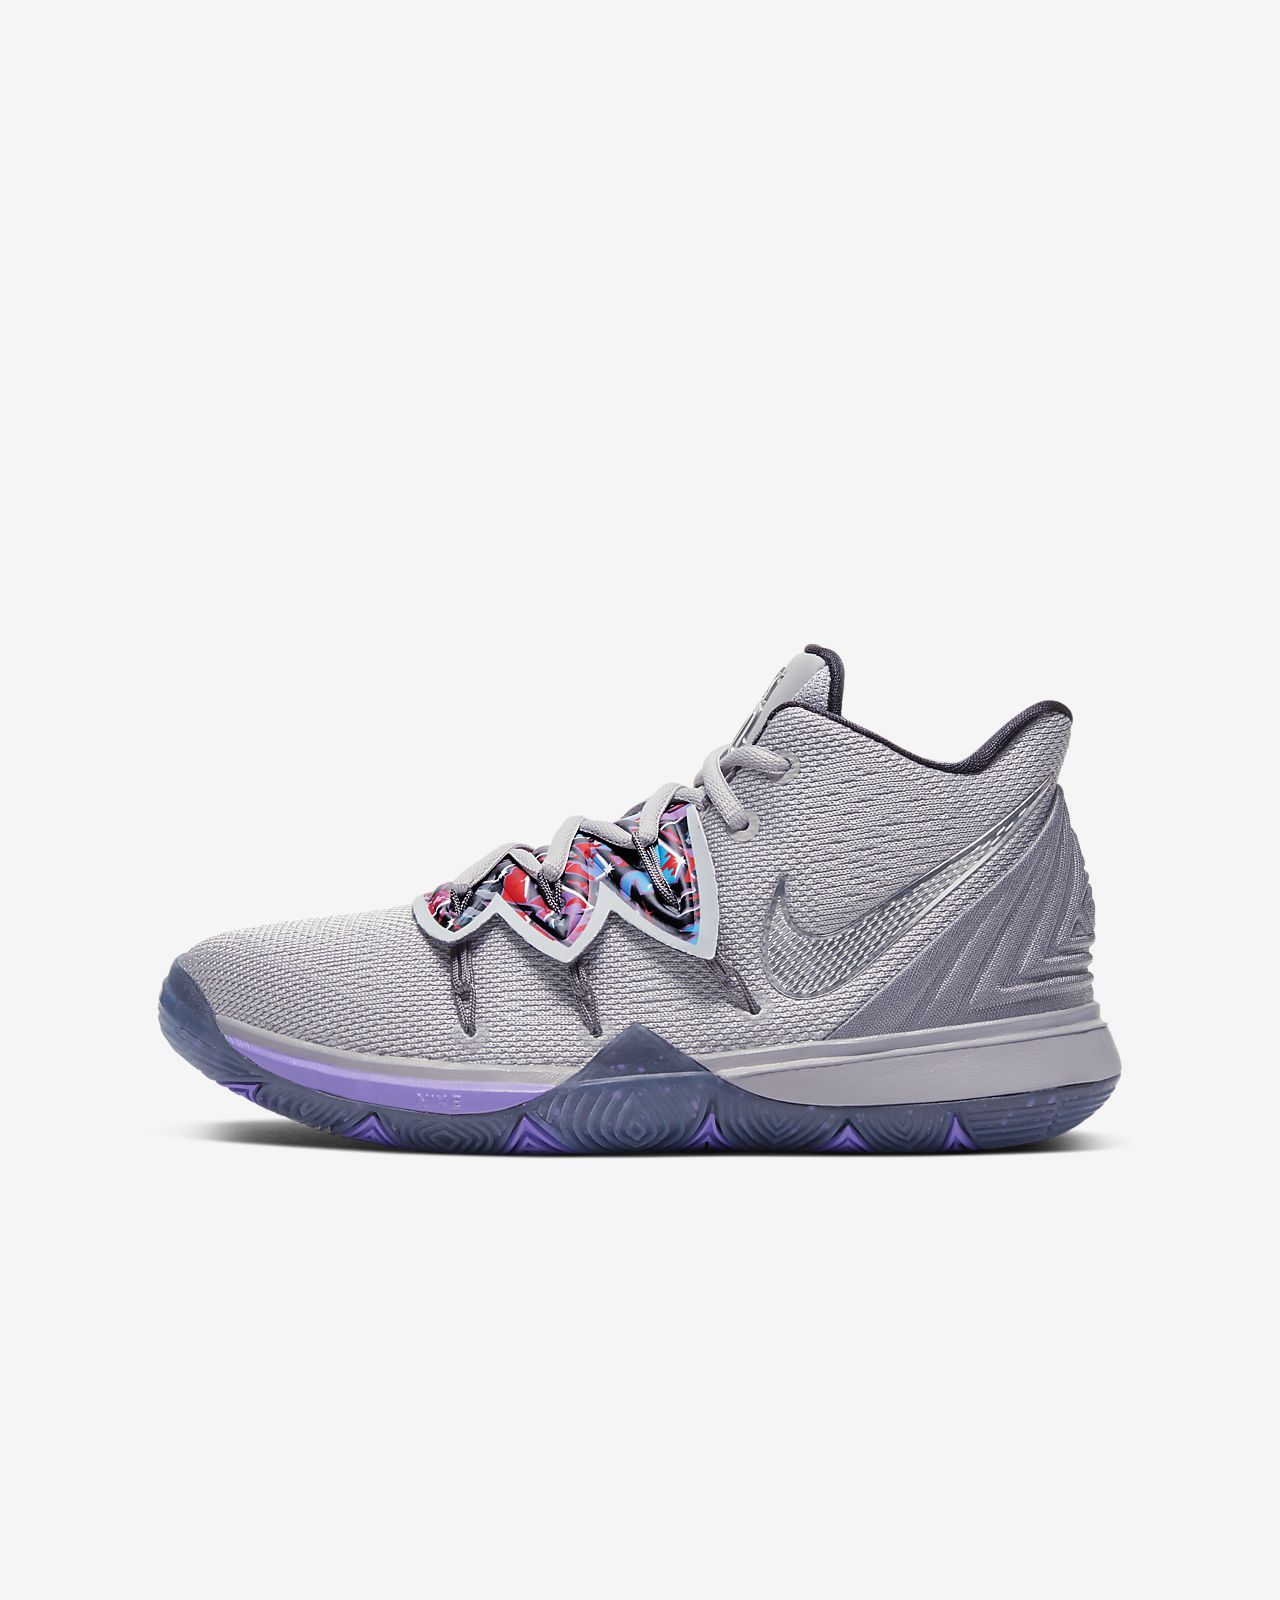 kyrie 5 black and purple